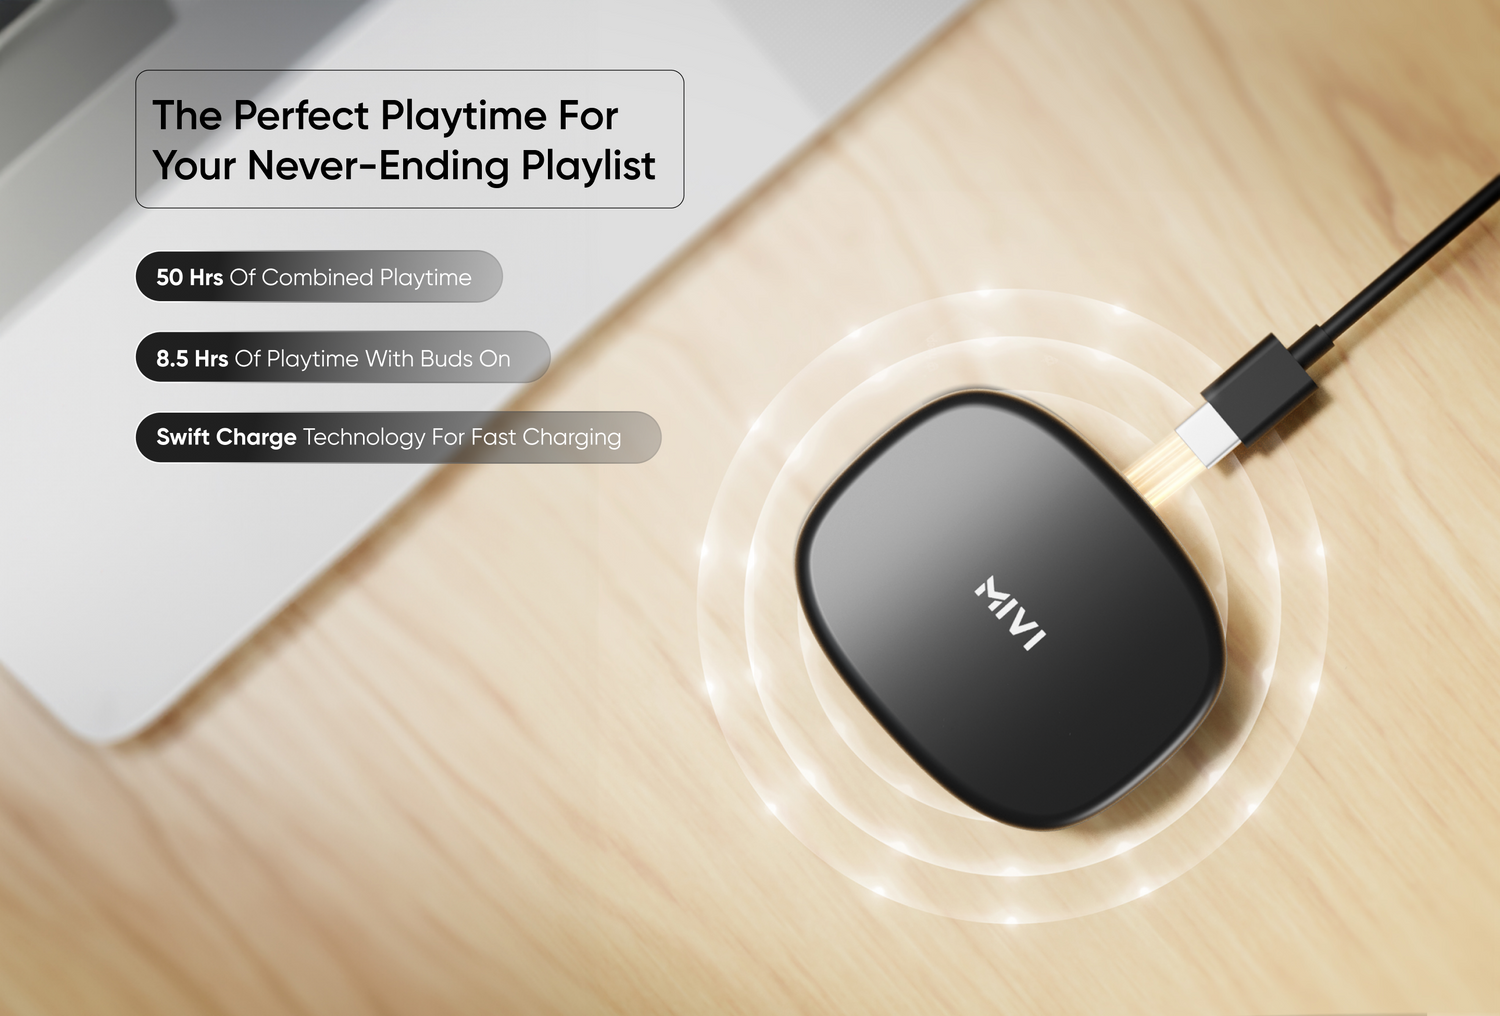 The Perfect Playtime ForYour Never-Ending Playlist 50 Hrs Of Combined Playtime 8.5 Hrs Of Playtime With Buds On Swift Charge Technology For Fast Charging